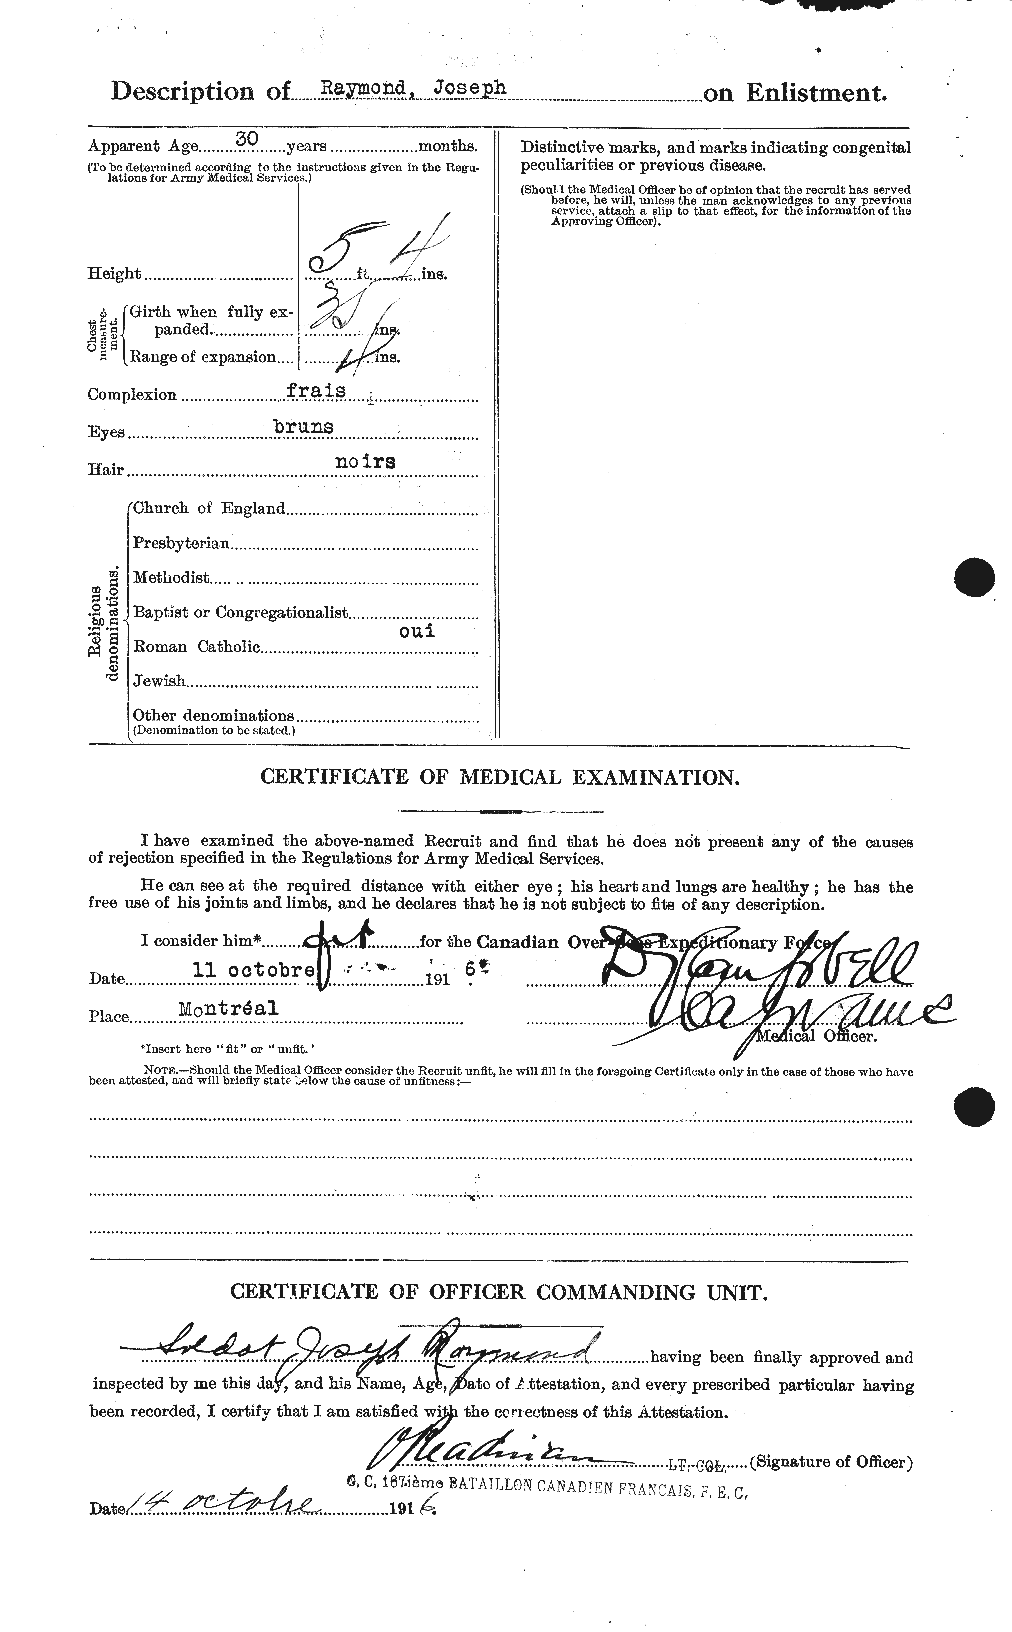 Personnel Records of the First World War - CEF 595388b